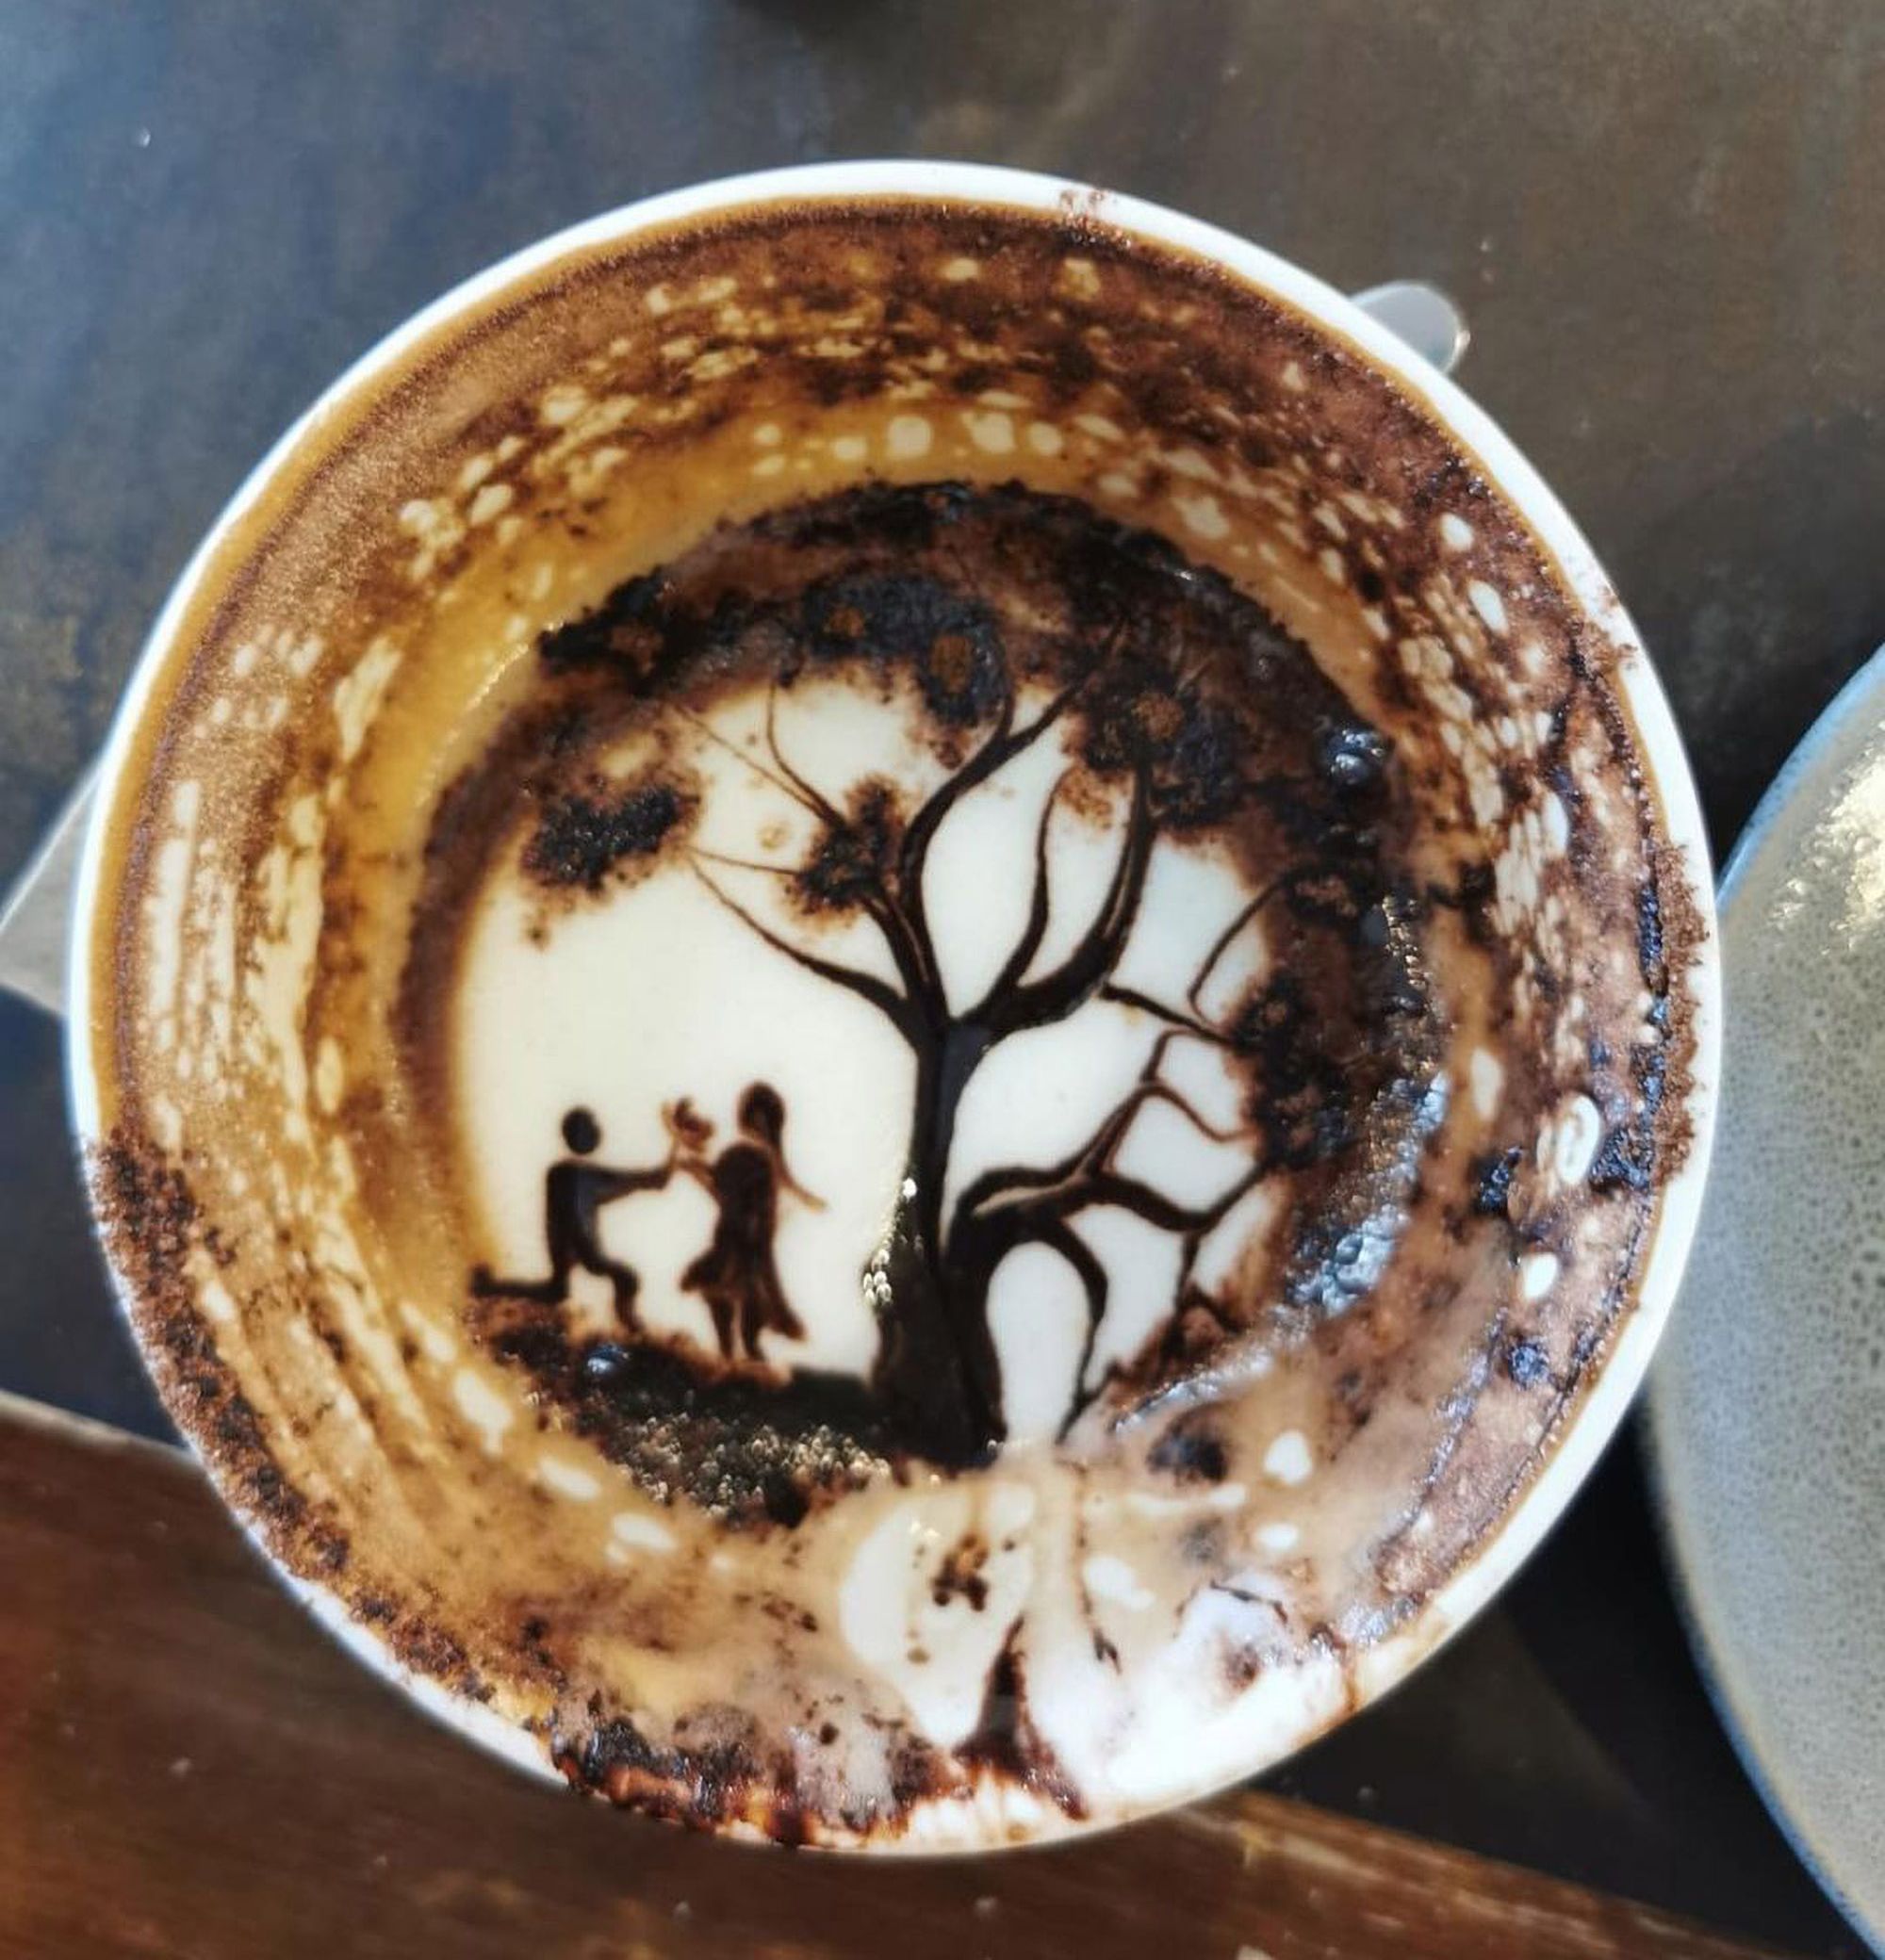 Whole latte love: Artist to teach fans how to make her stunning coffee creations